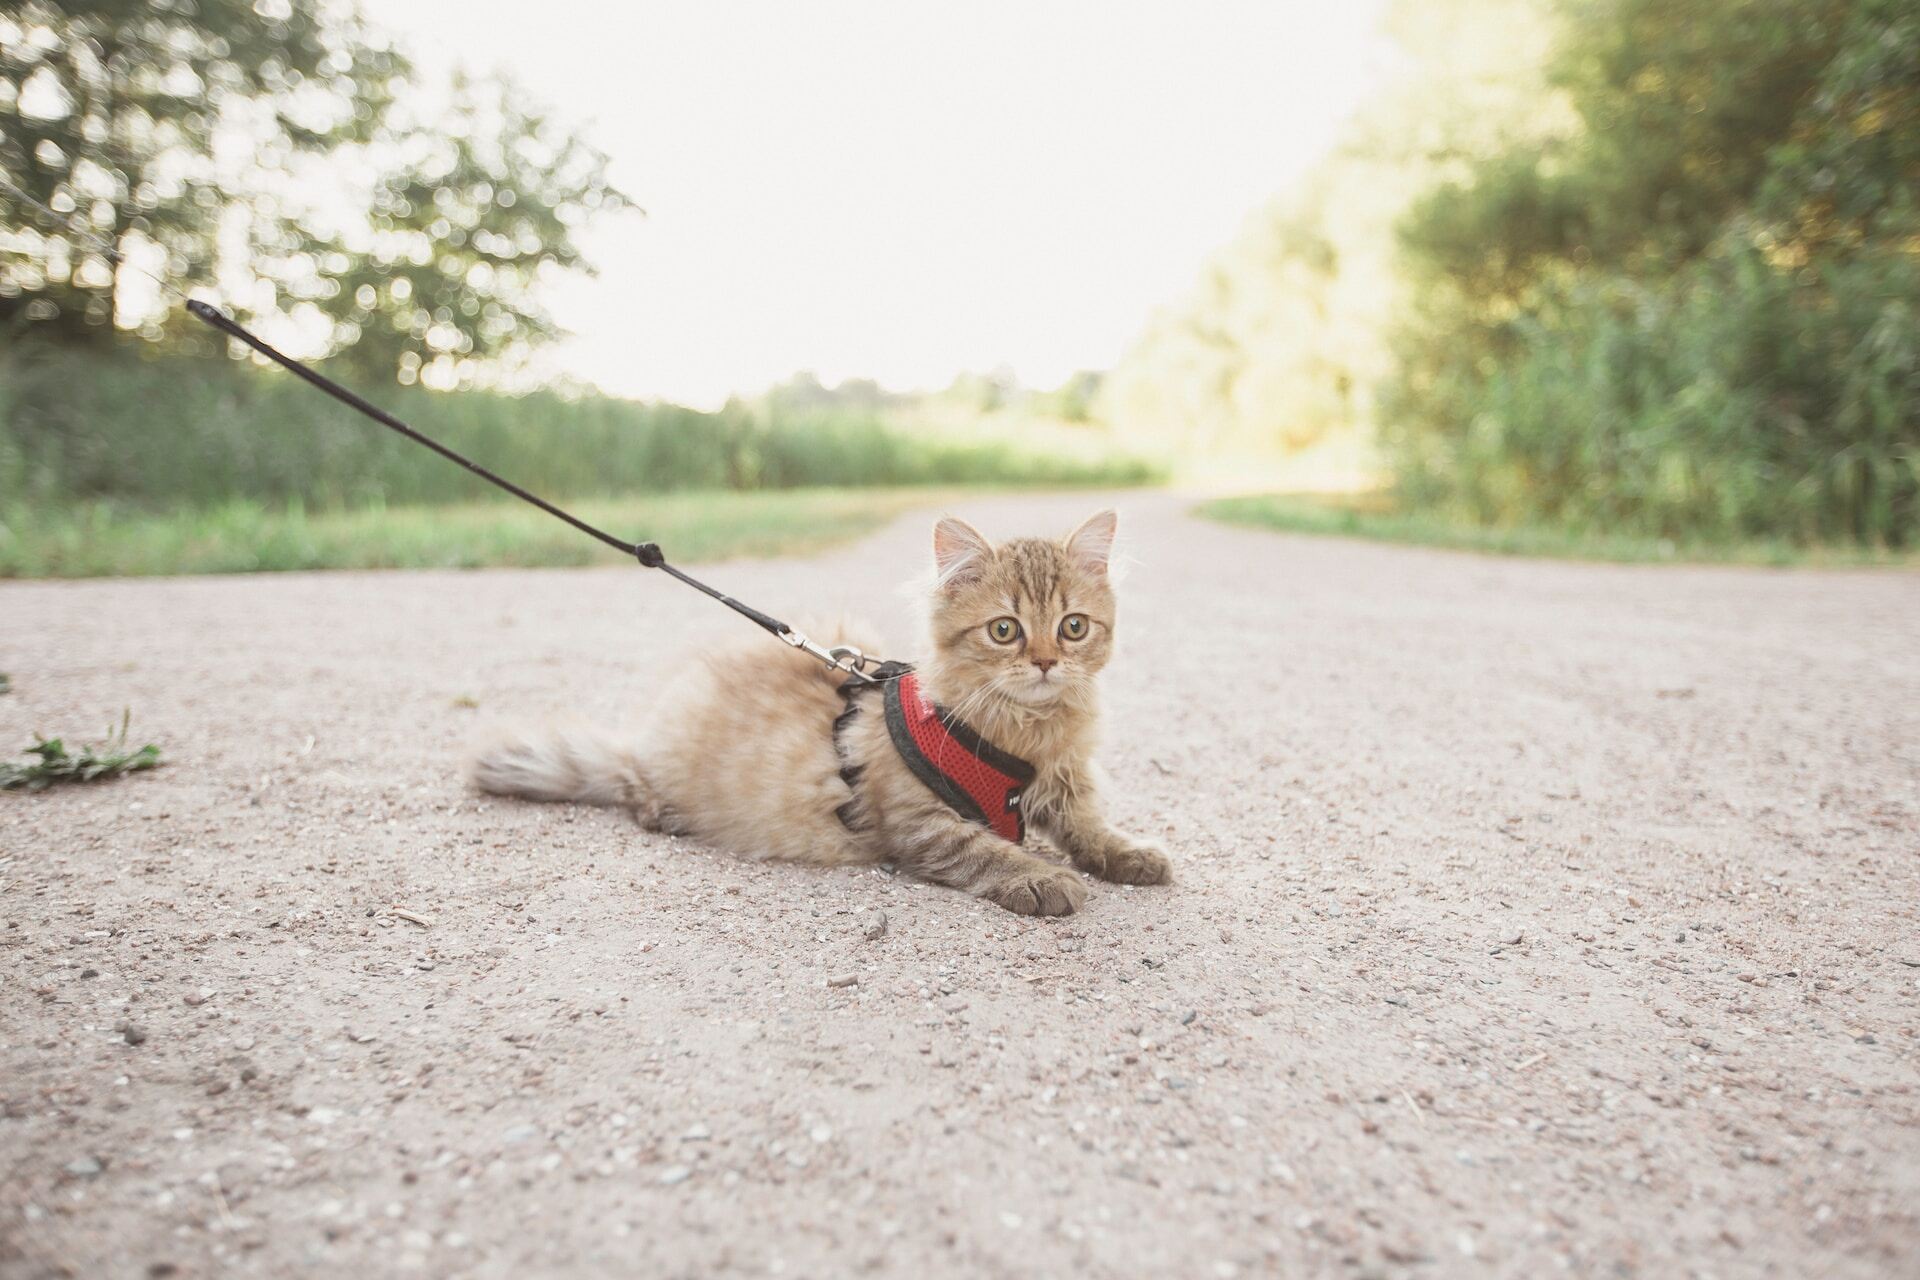 A small cat wearing a red harness and leash outdoors